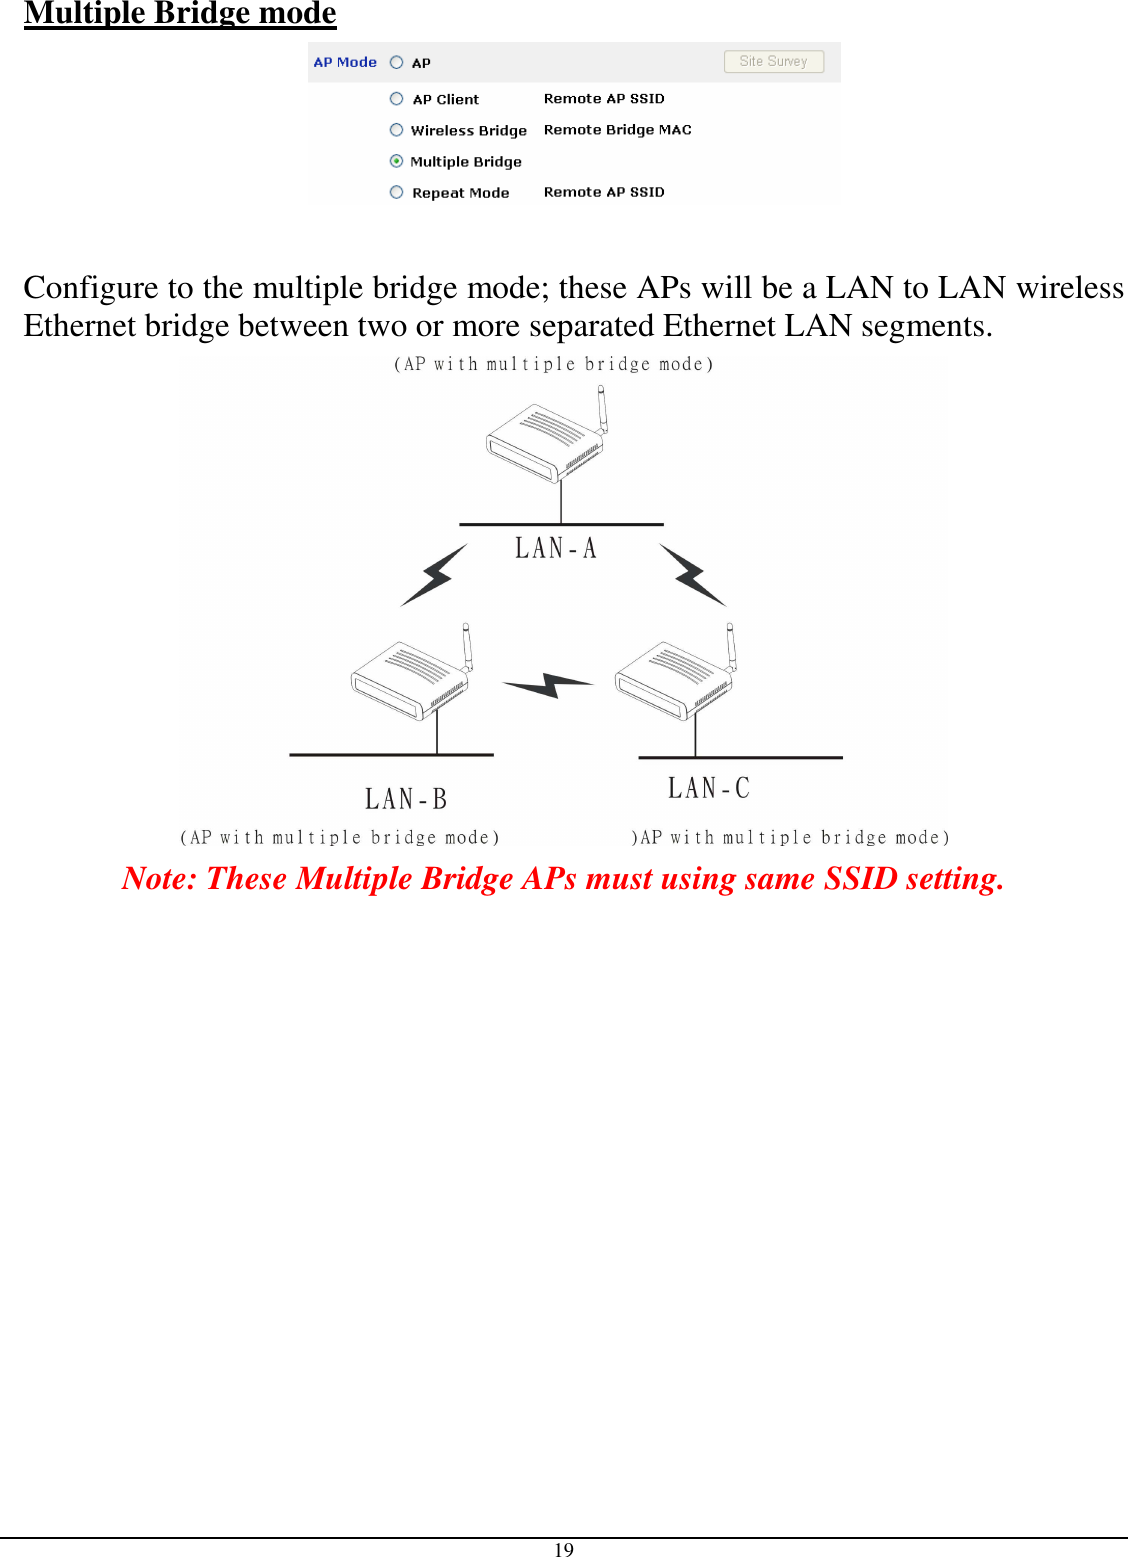  19 Multiple Bridge mode    Configure to the multiple bridge mode; these APs will be a LAN to LAN wireless Ethernet bridge between two or more separated Ethernet LAN segments.  Note: These Multiple Bridge APs must using same SSID setting. 